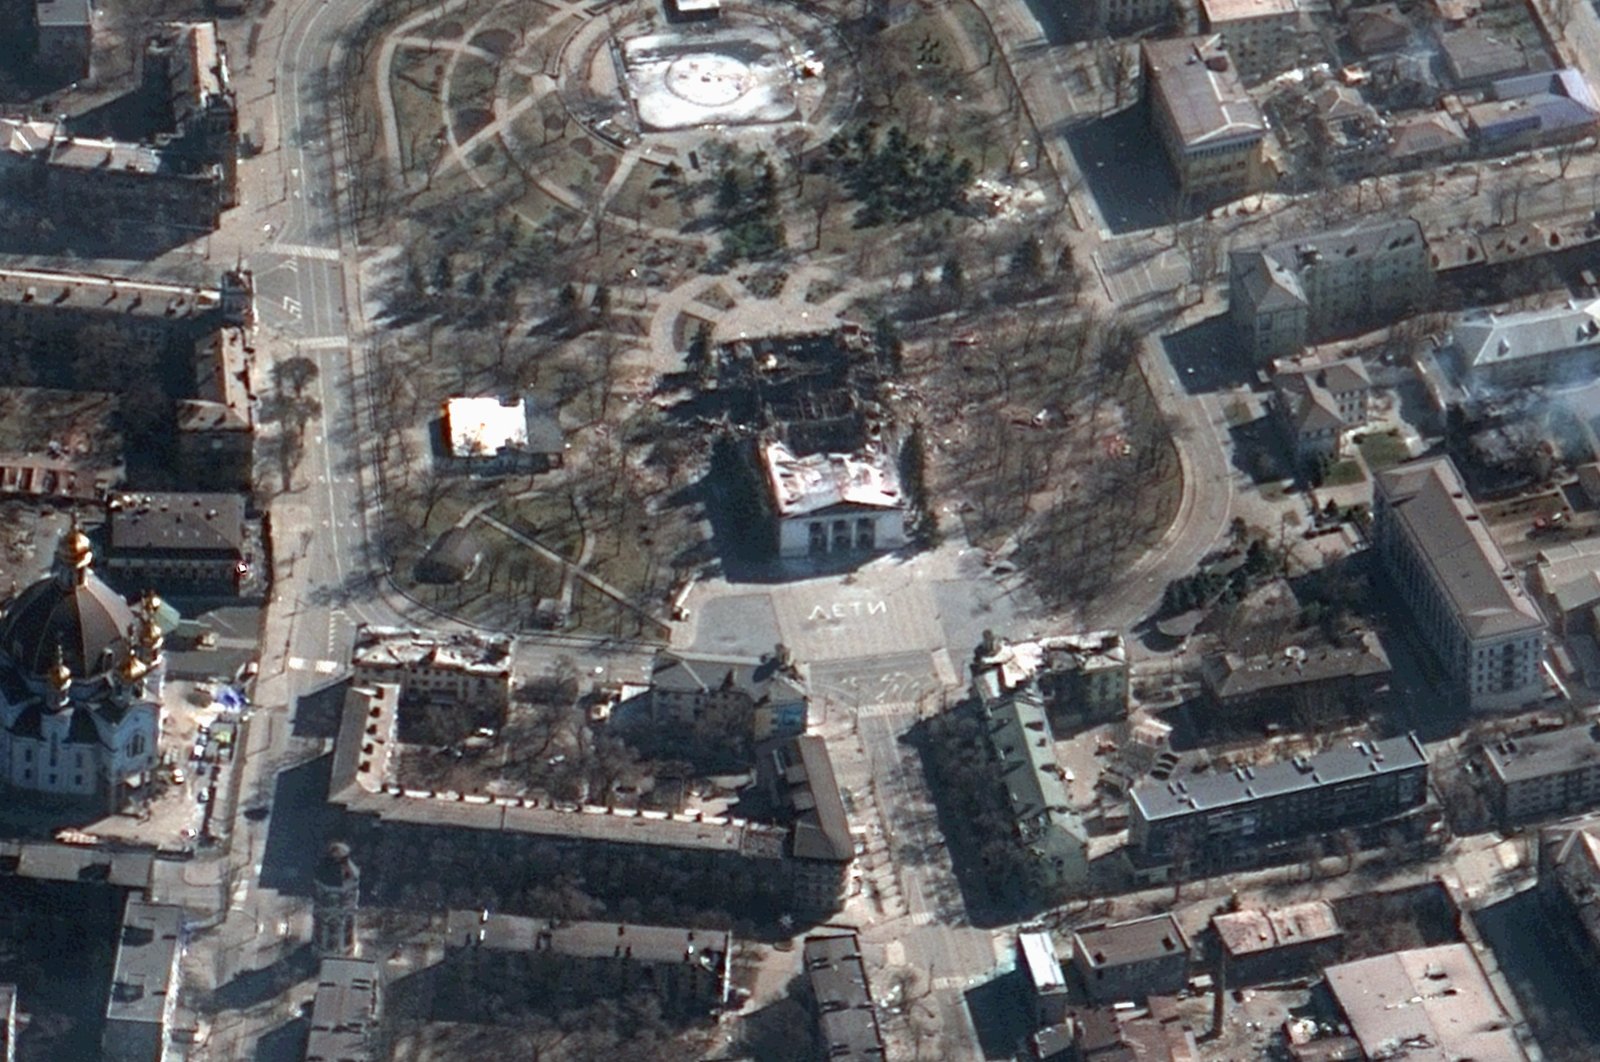 This satellite image provided by Maxar Technologies on Saturday, March 19, 2022, shows the aftermath of the airstrike on the Mariupol Drama theater and the area around it, Mariupol, Ukraine. (Satellite image ©2022 Maxar Technologies via AP)